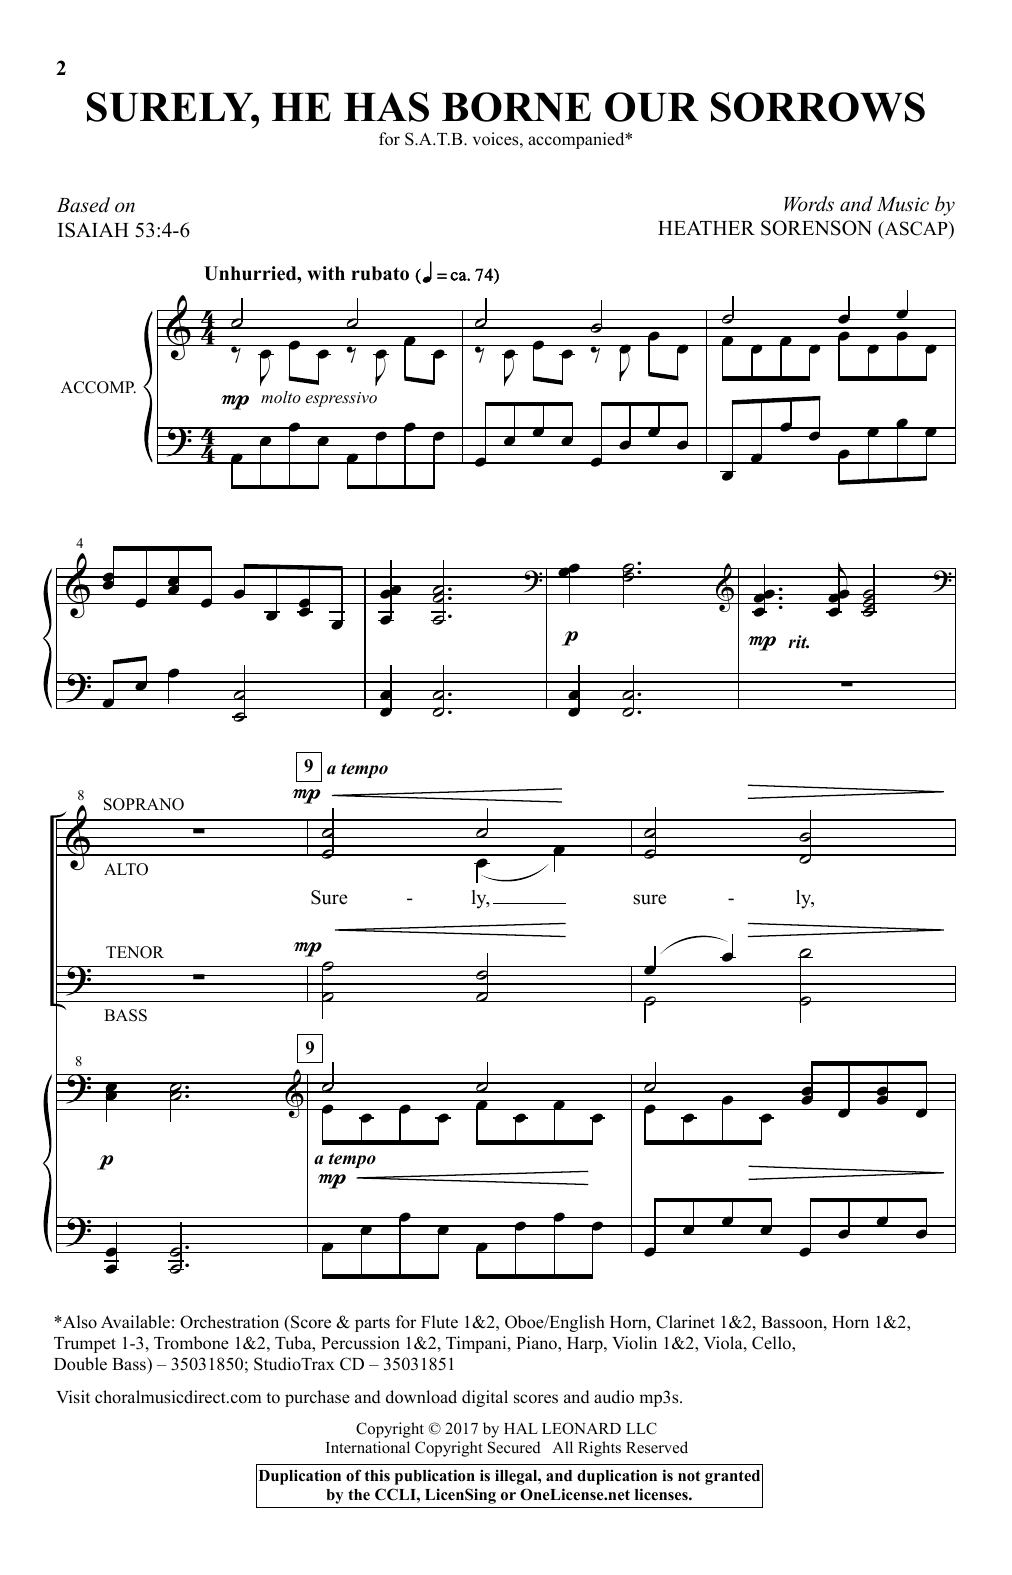 Download Heather Sorenson Surely, He Has Borne Our Sorrows Sheet Music